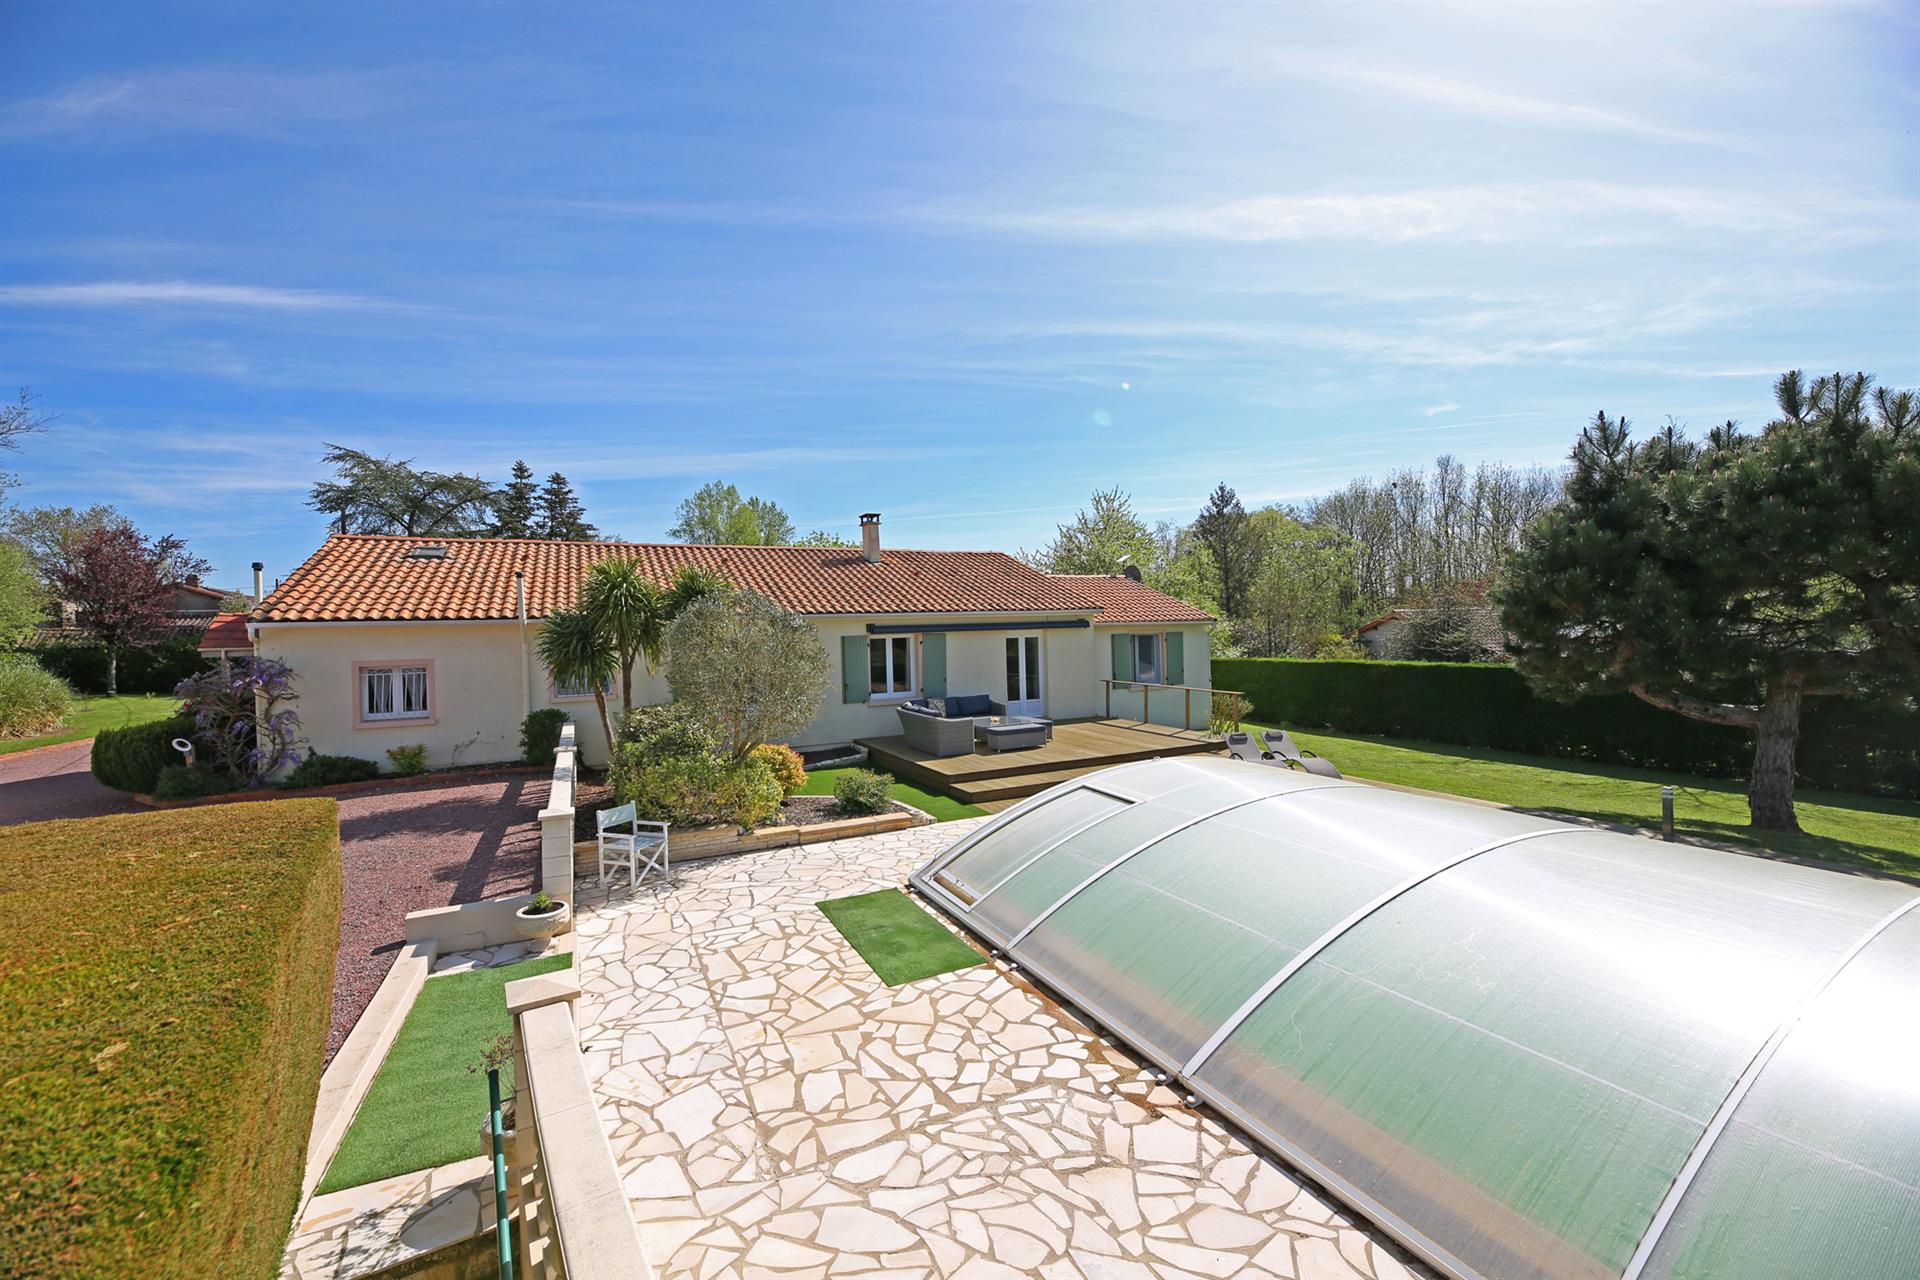 Immaculate bungalow 3bed/2bath, covered pool & 1.5 hectares